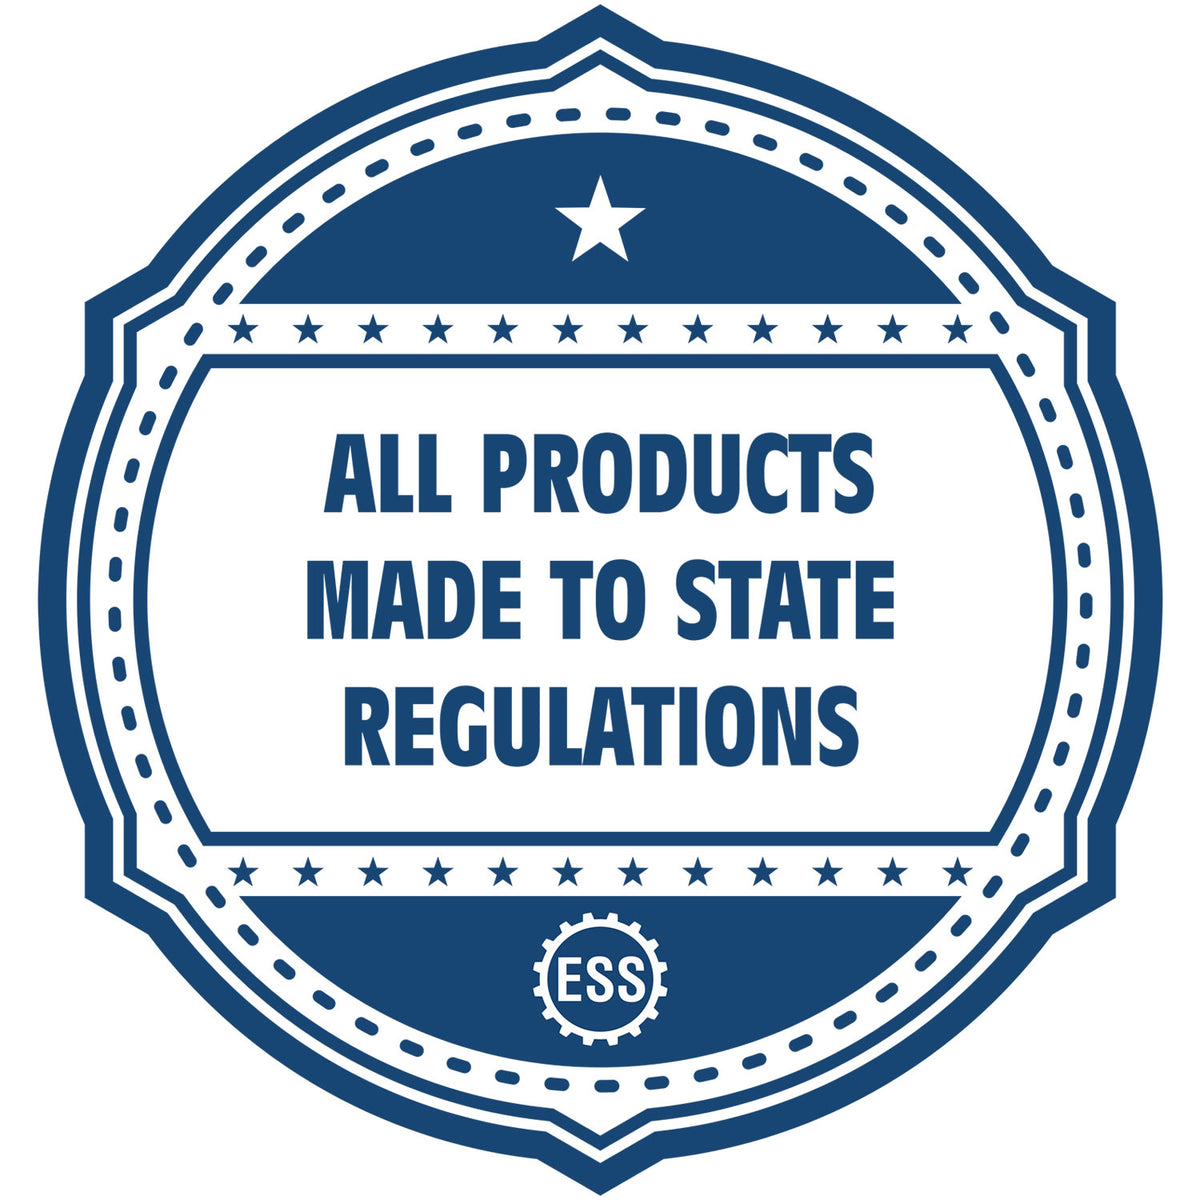 An icon or badge element for the Self-Inking Kentucky PE Stamp showing that this product is made in compliance with state regulations.